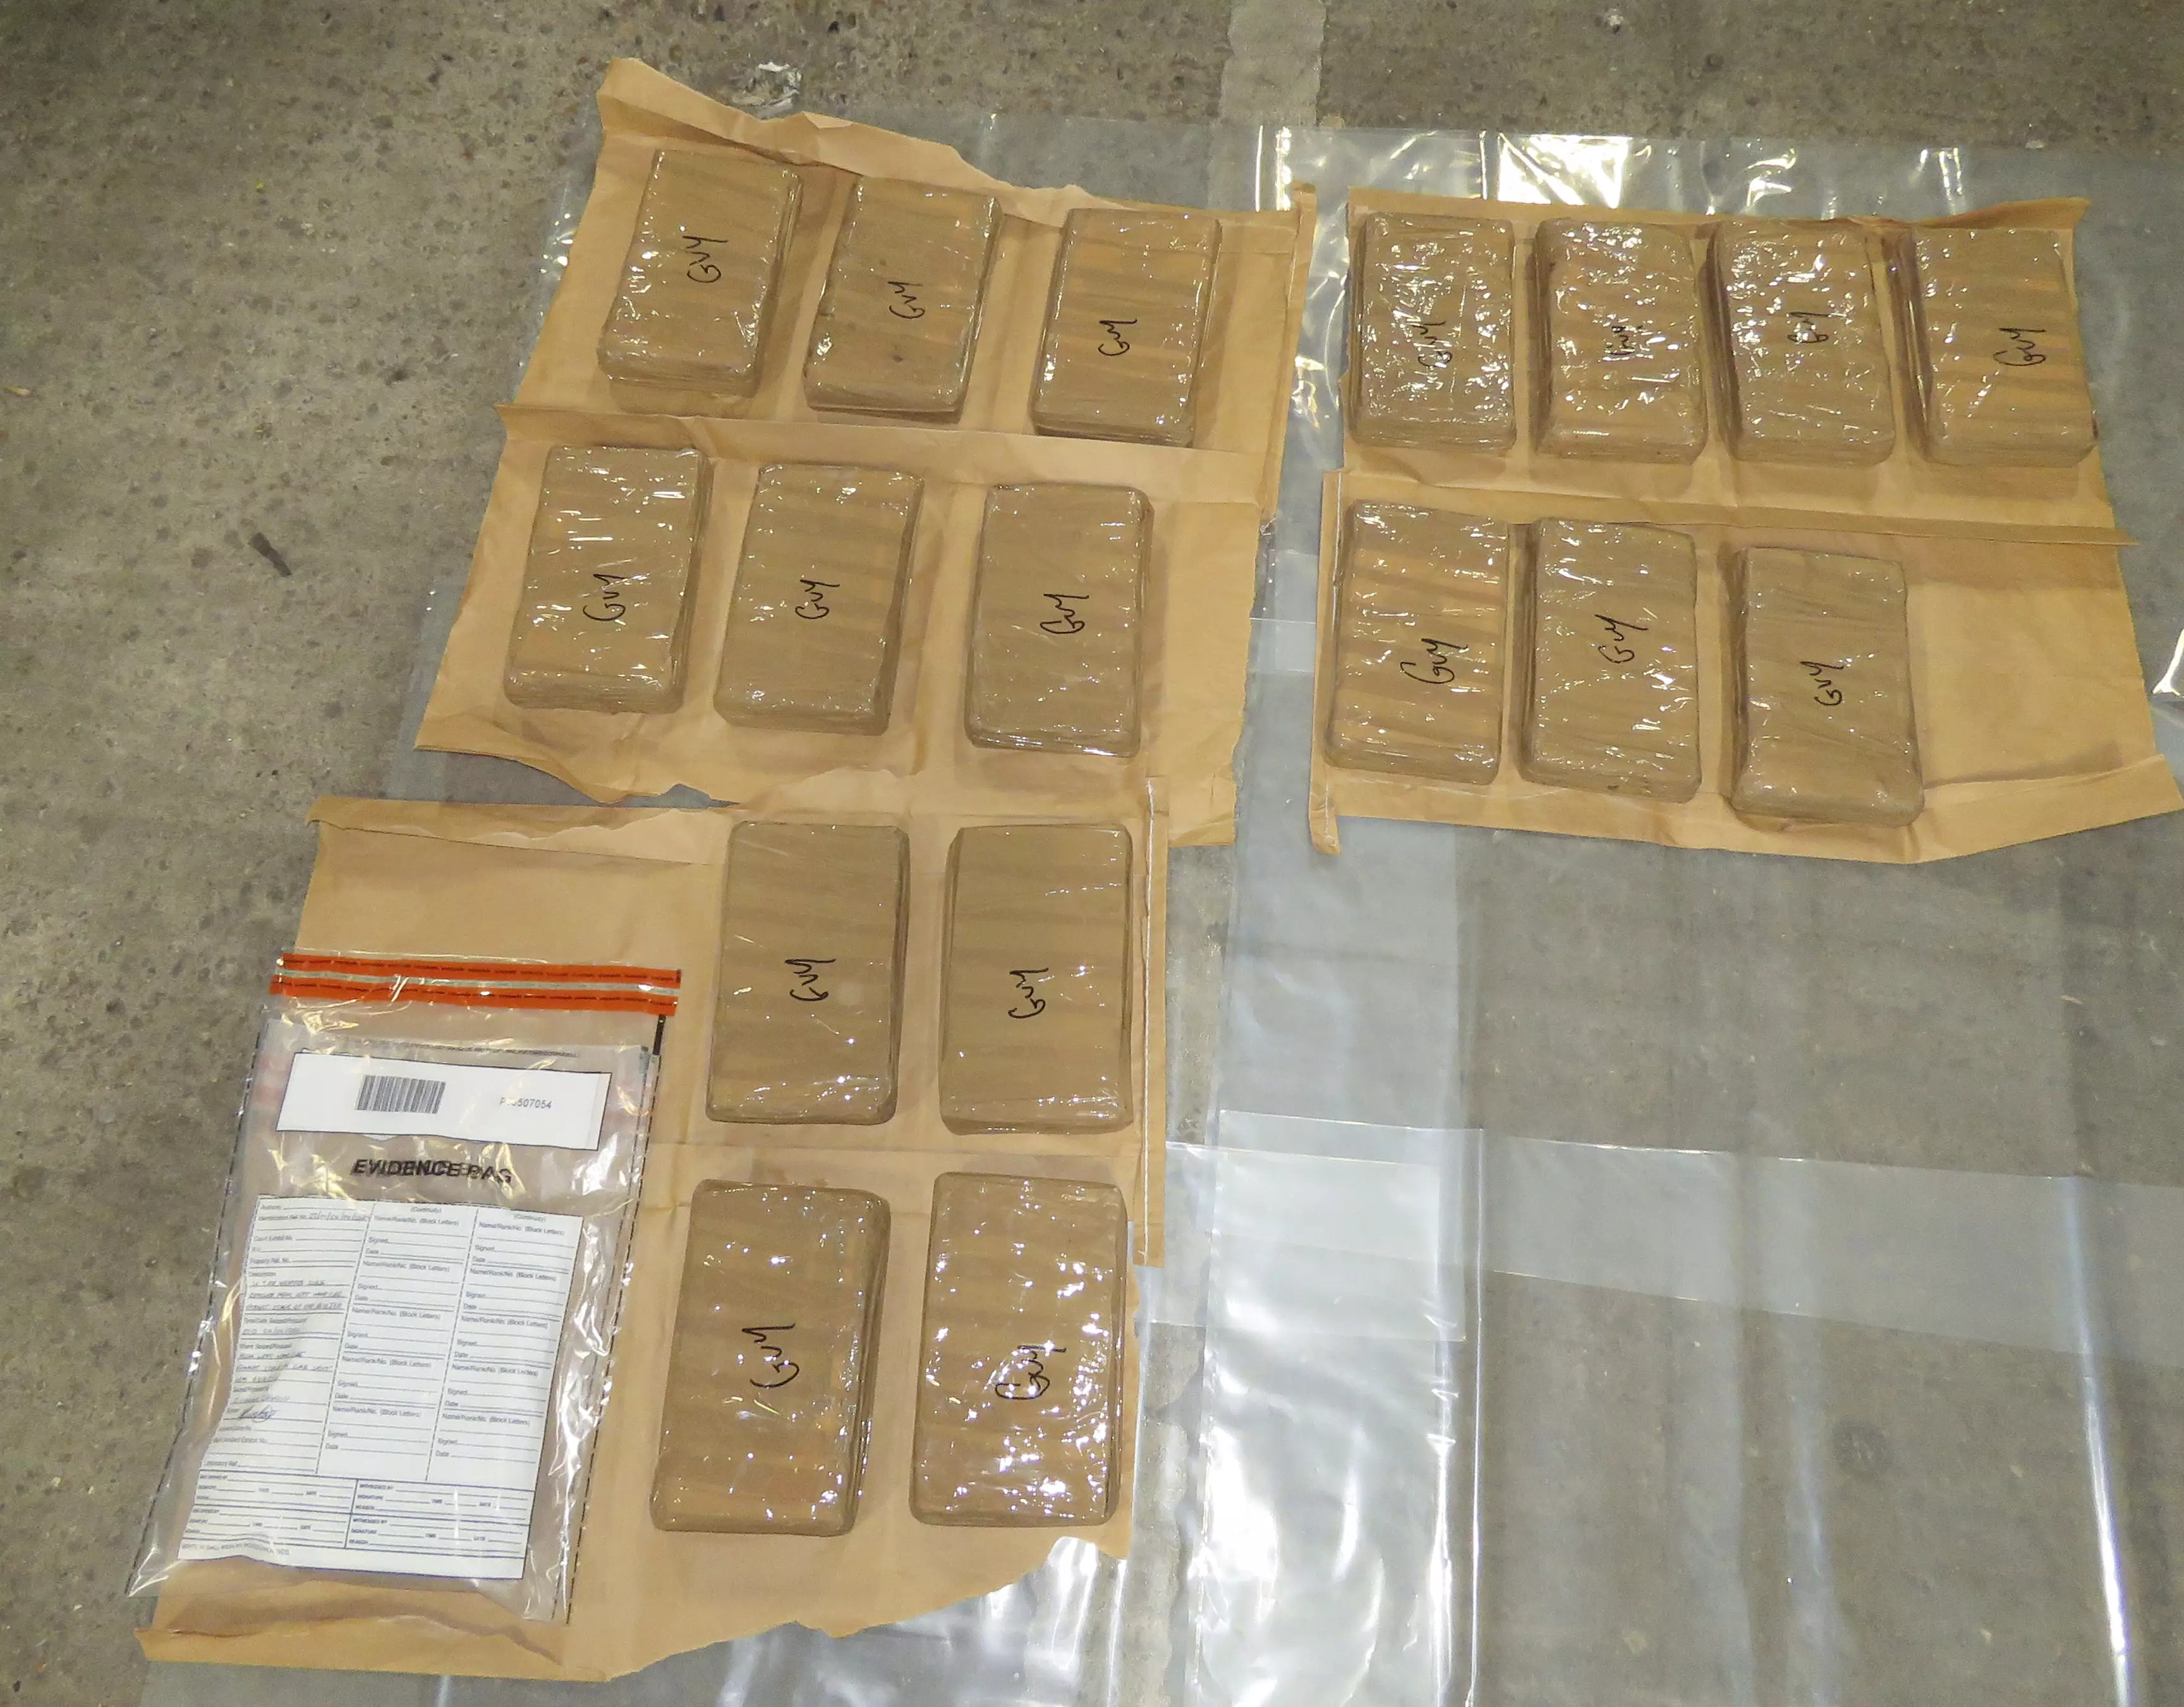 Officers found 36kg of cocaine.